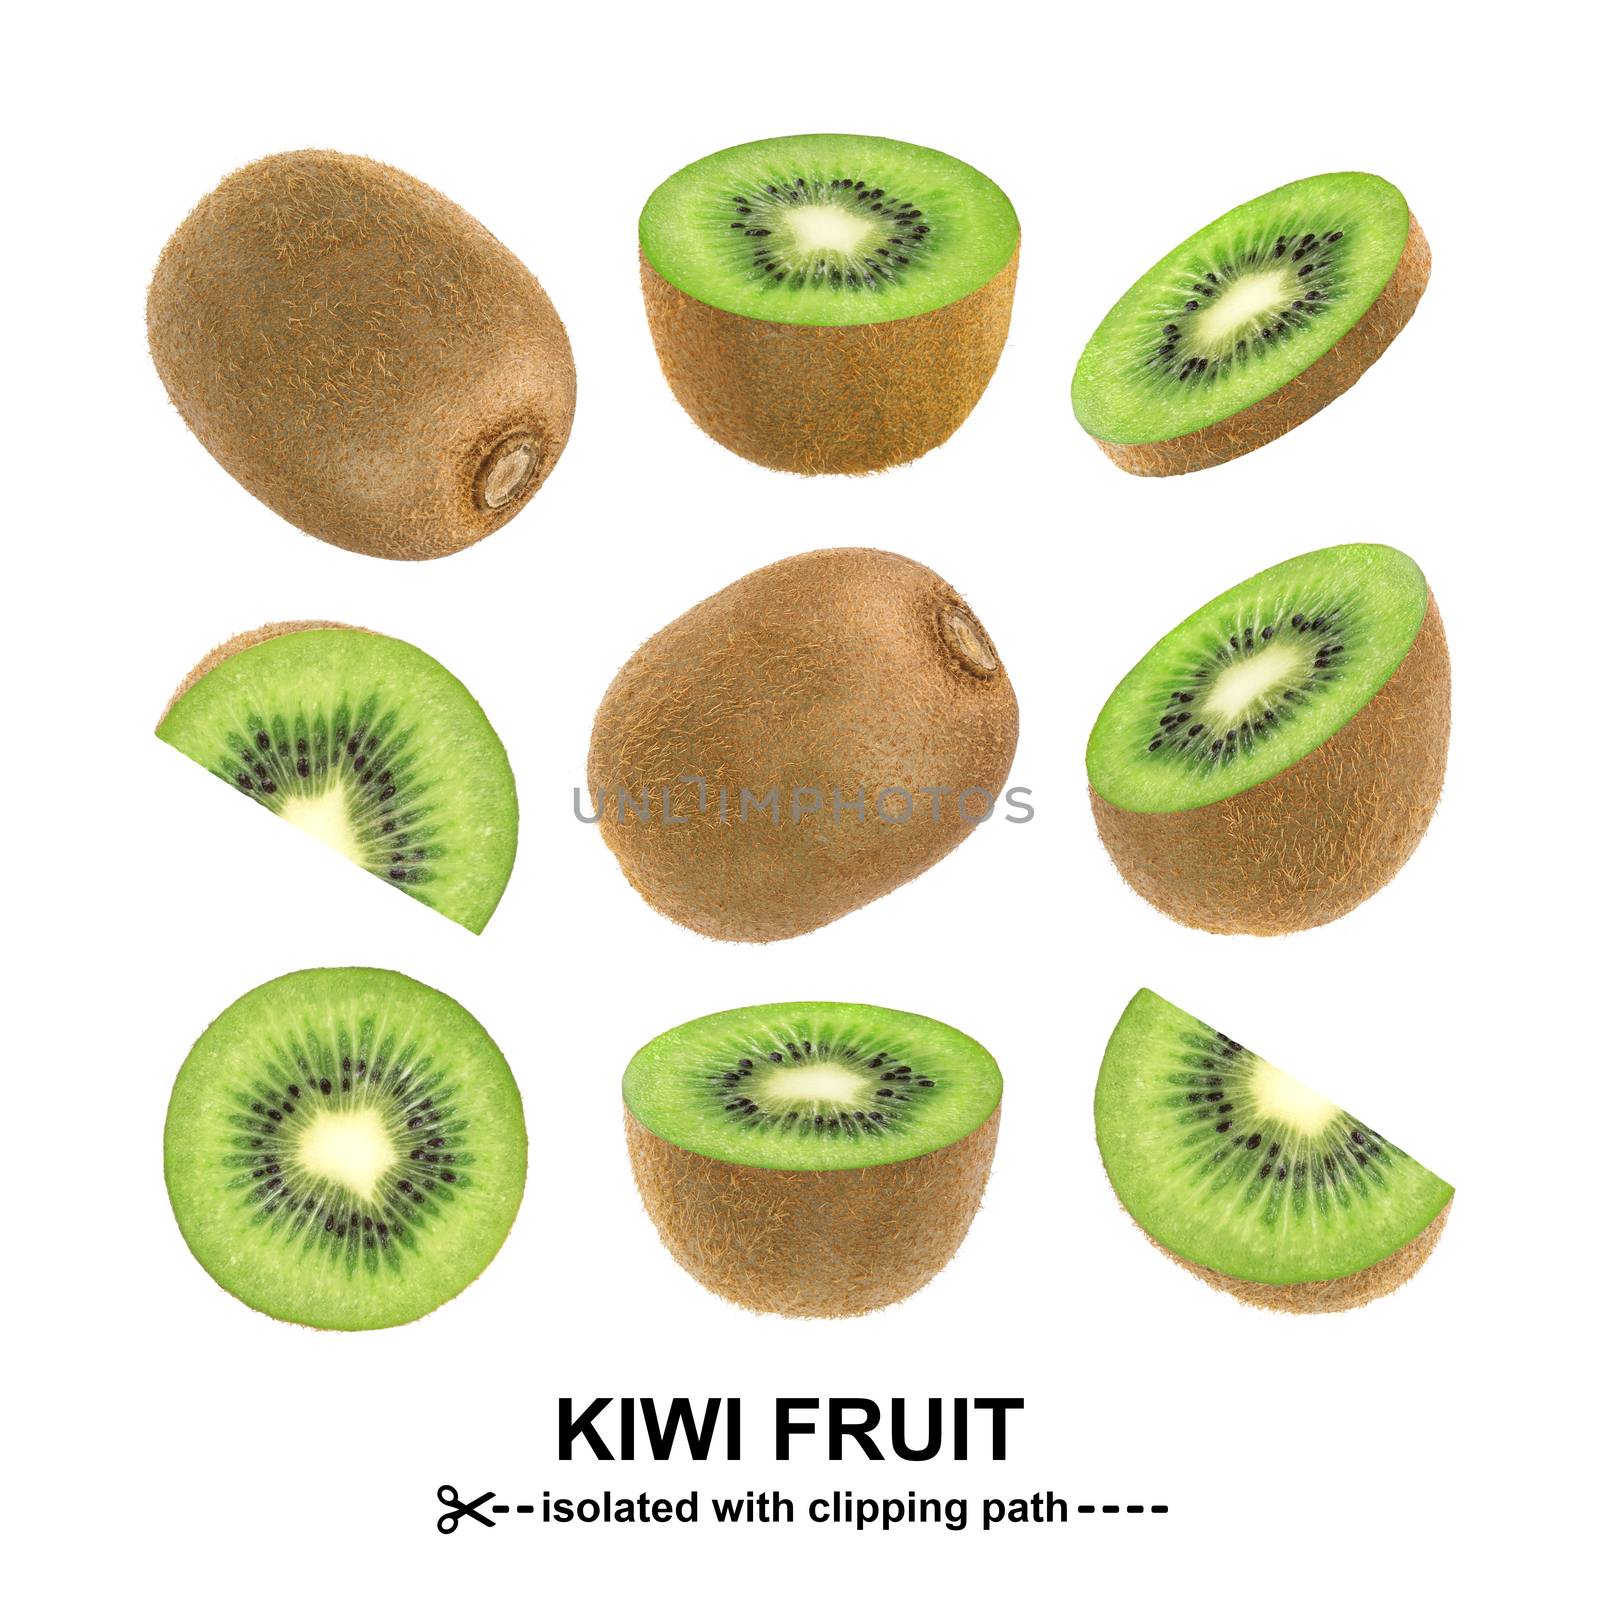 Kiwi fruit isolated on white background with clipping path. Collection